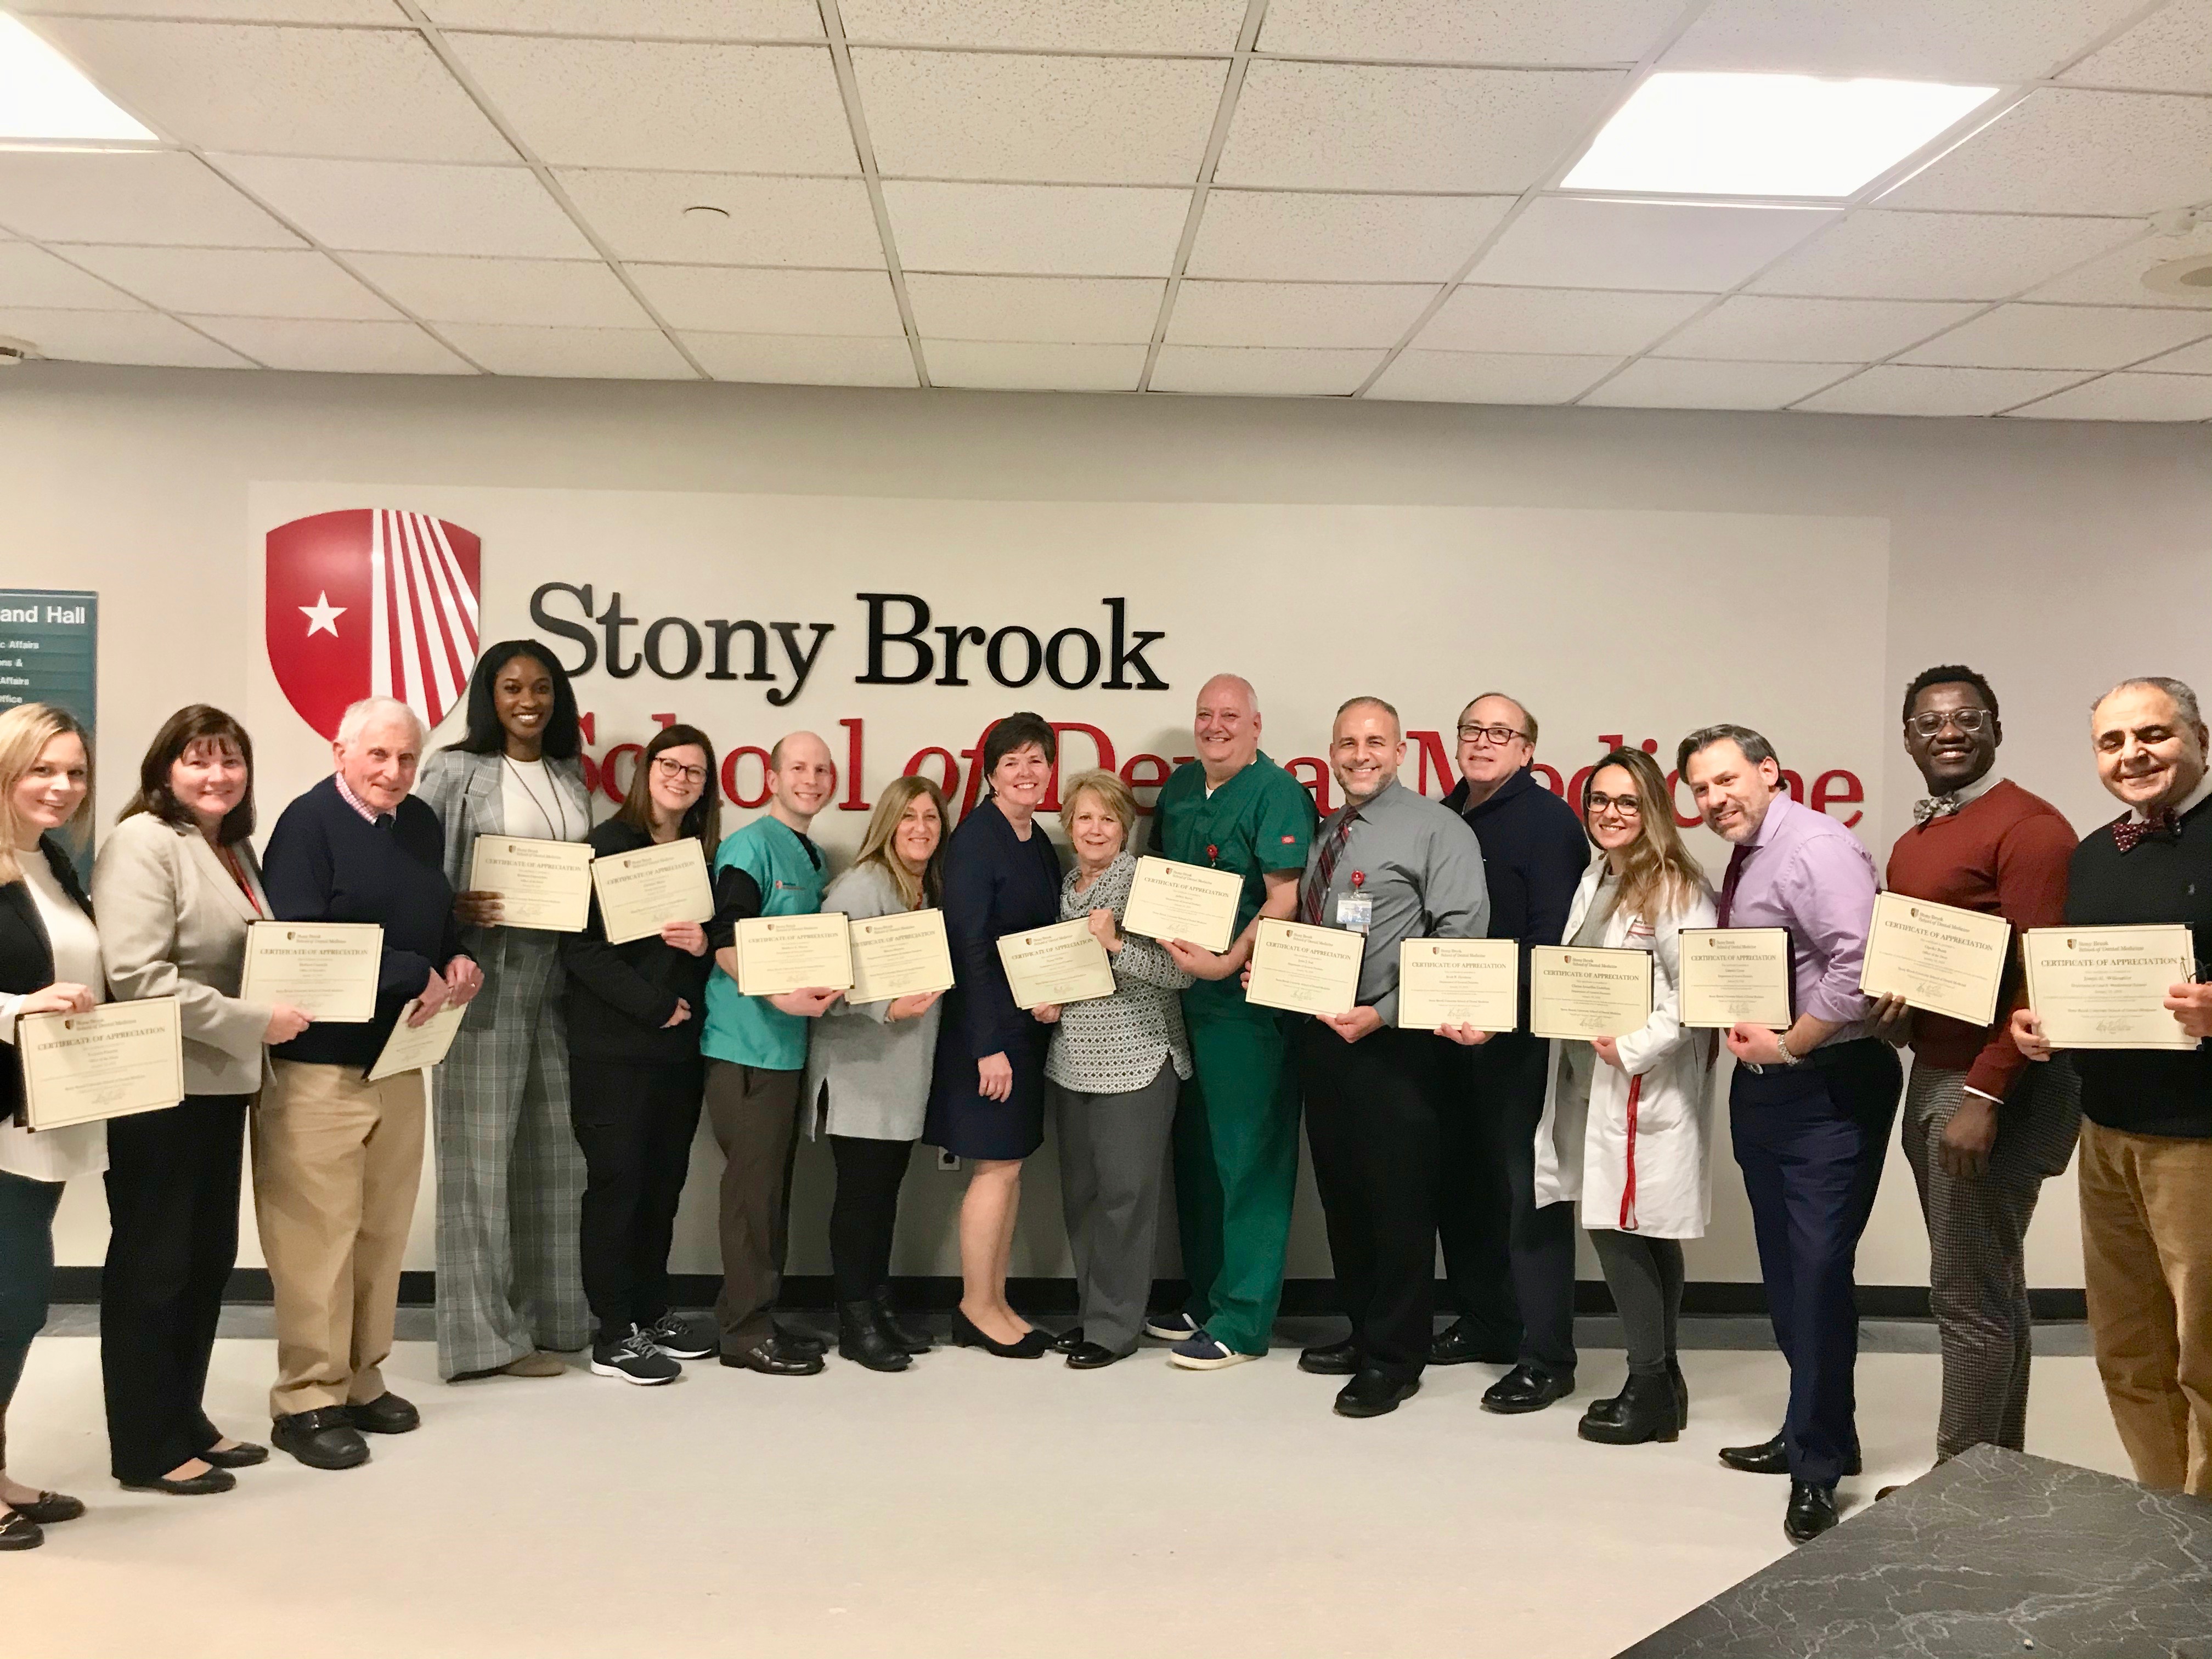 Group photo of Stony Brook School of Dental Medicine faculty and staff holding award certificates. 